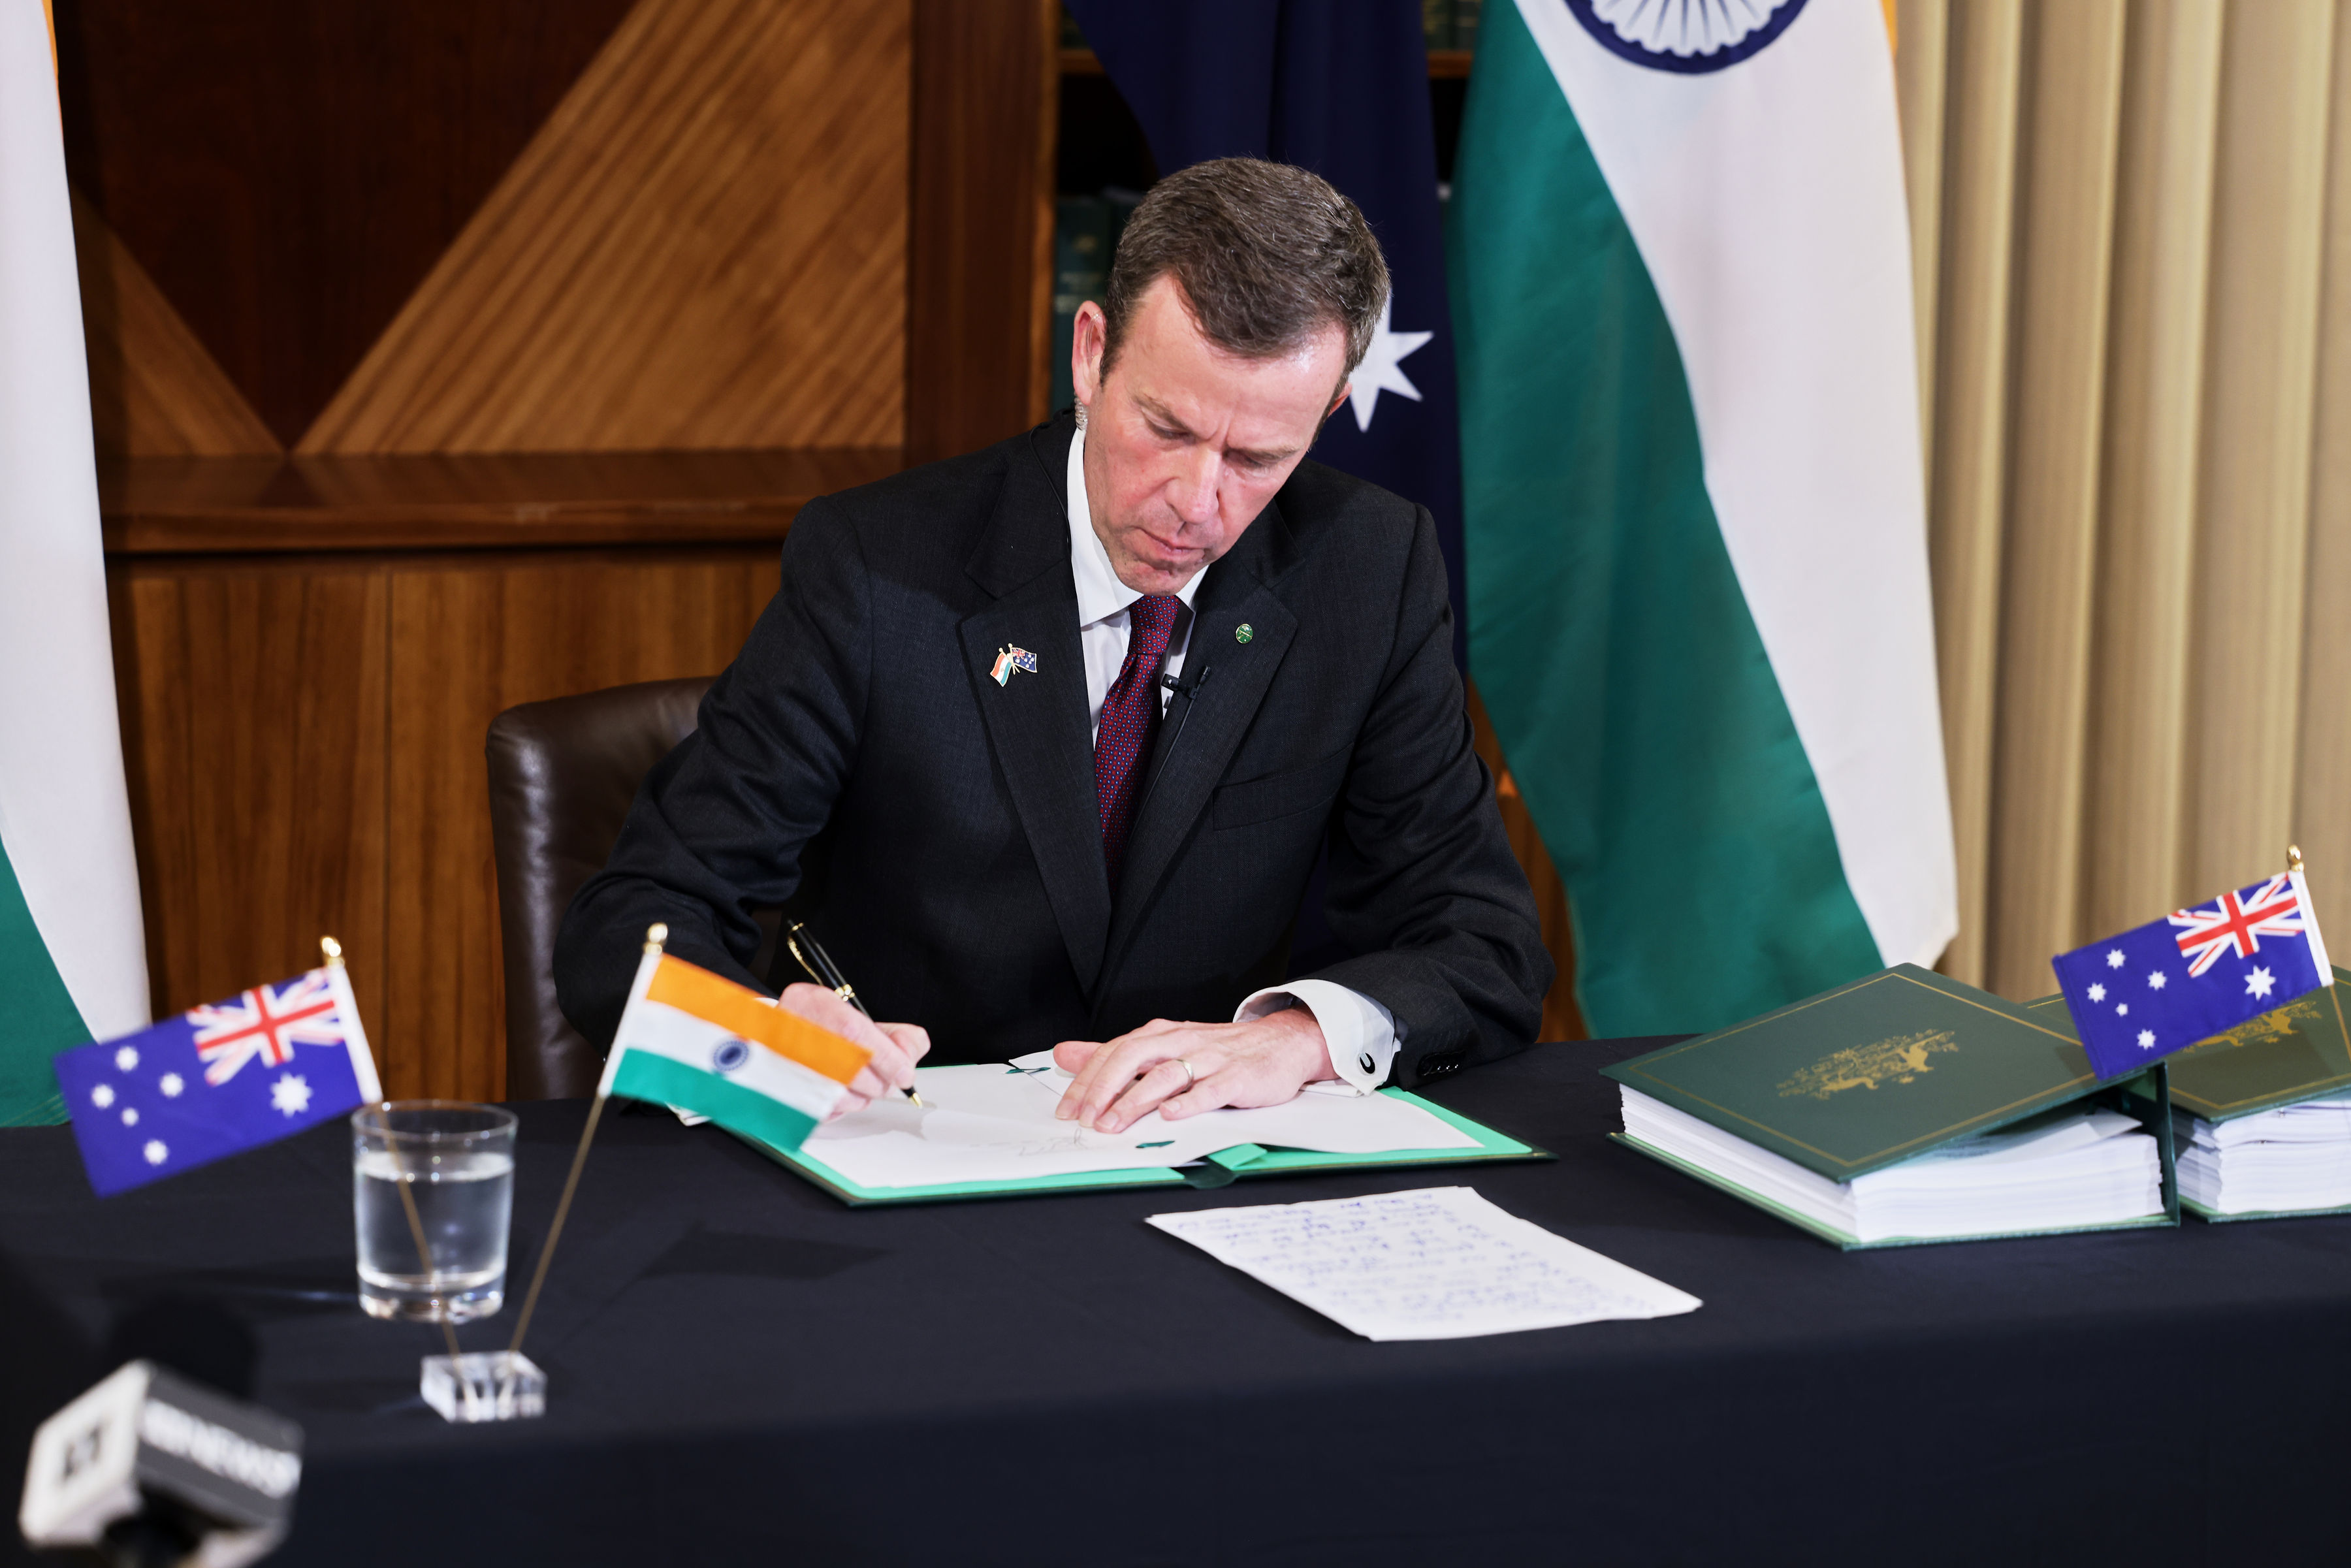 Australia’s Minister for Trade, Tourism and Investment, Dan Tehan MP, signs the Australia-India Economic Cooperation and Trade Agreement